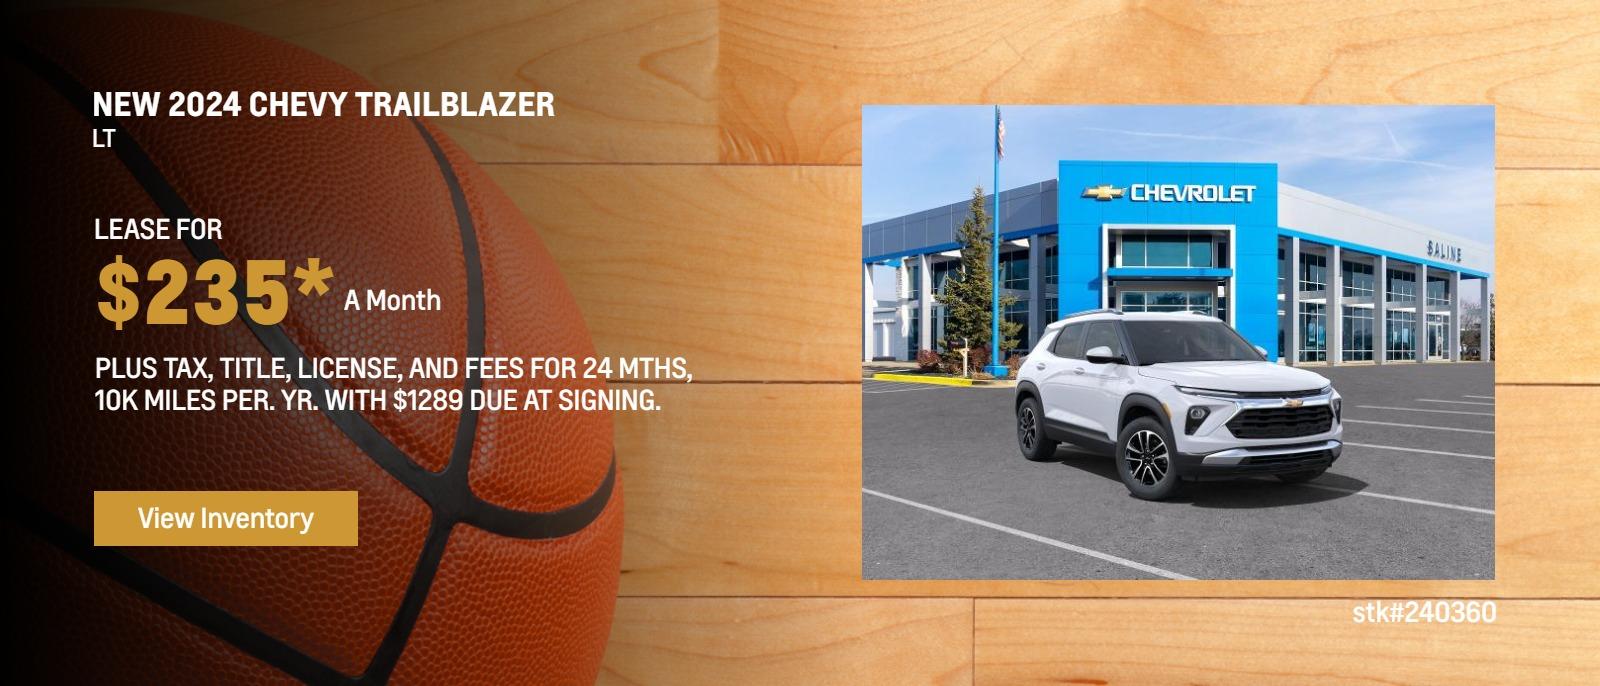 New 2024 Chevy Trailblazer LT, lease for $235* a mth plus tax, title, license, and fees for 24 mths, 10K miles per. yr. with $1289 due at signing. stk#240360